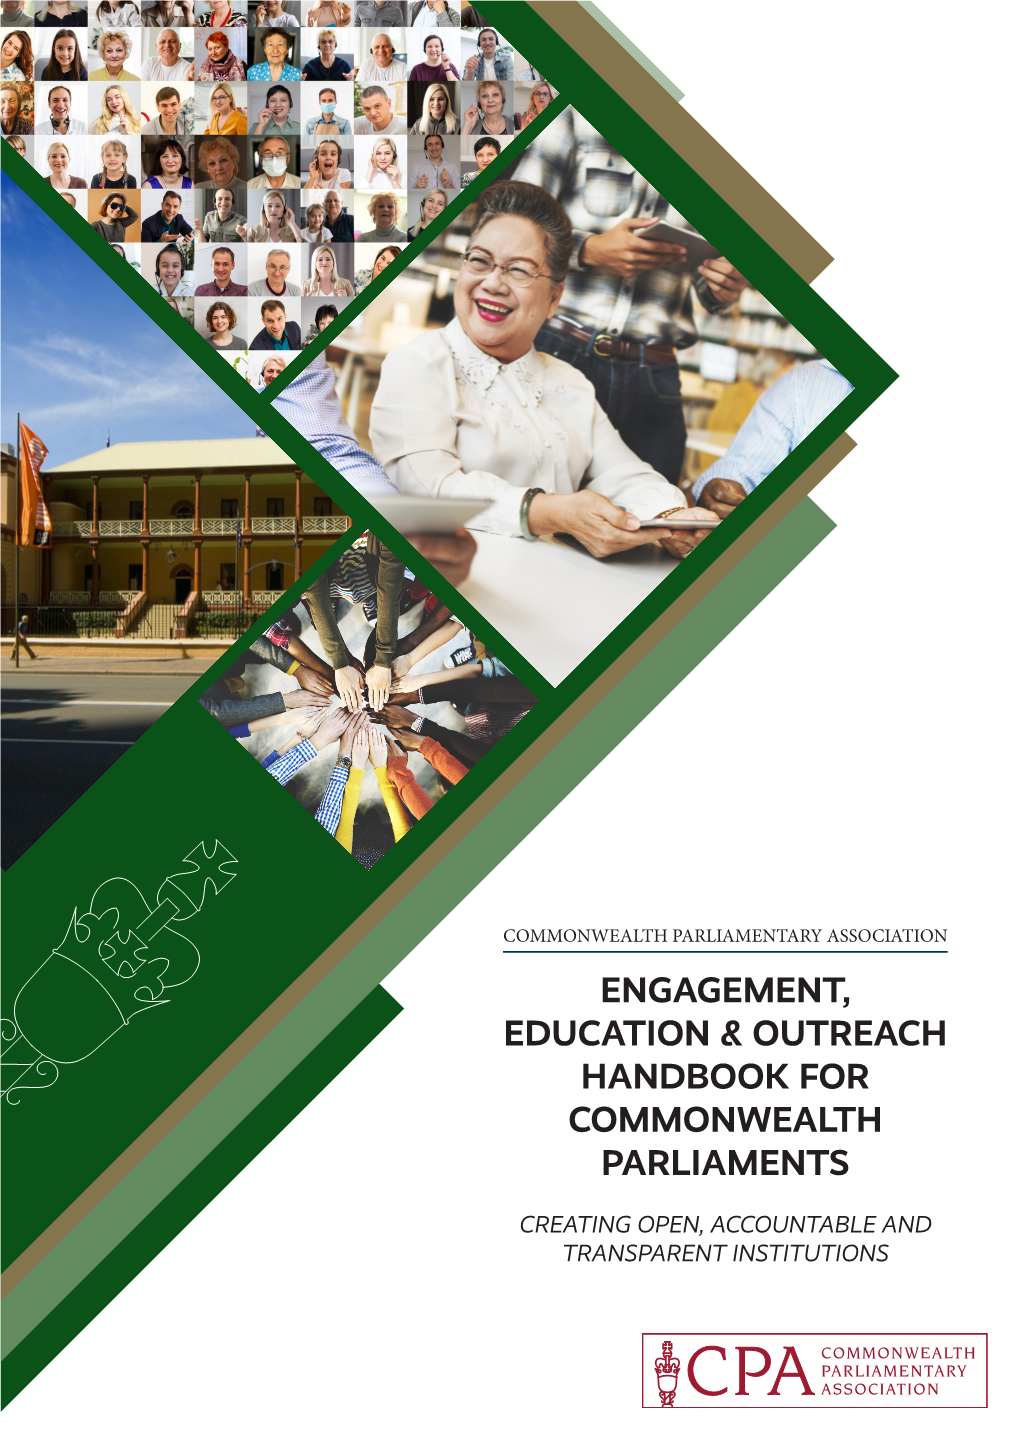 Engagement, Education & Outreach Handbook for Commonwealth Parliaments